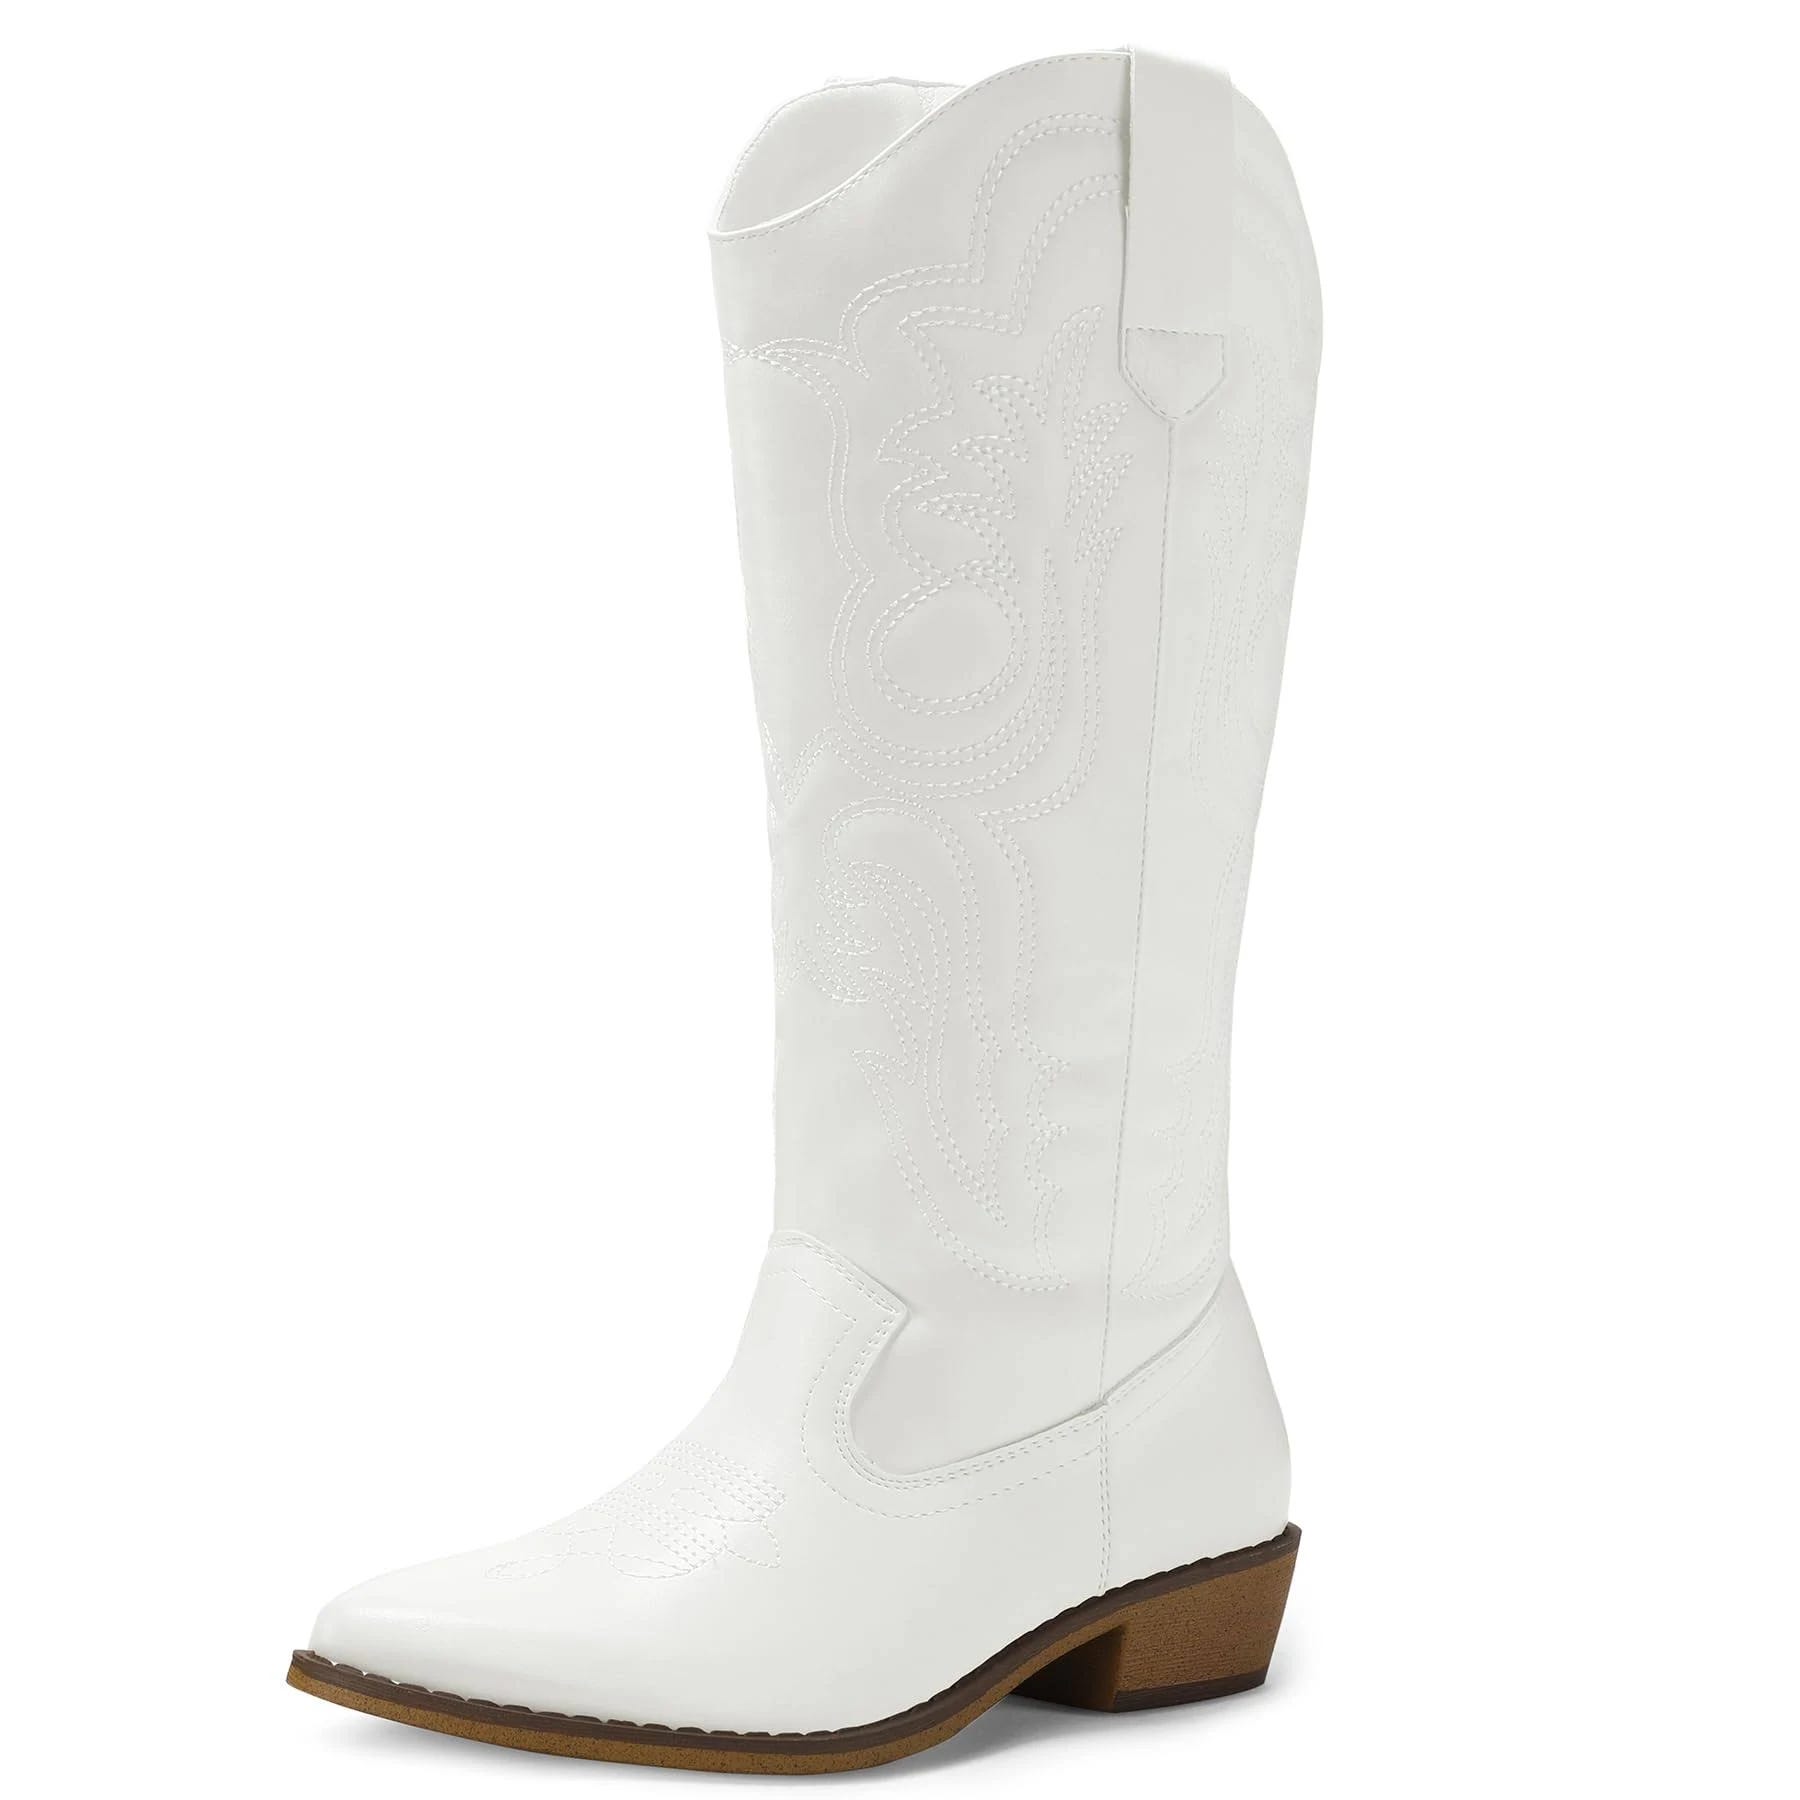 Embroidered Knee-High White Cowgirl Boots - Durable and Stylish Western Footwear | Image